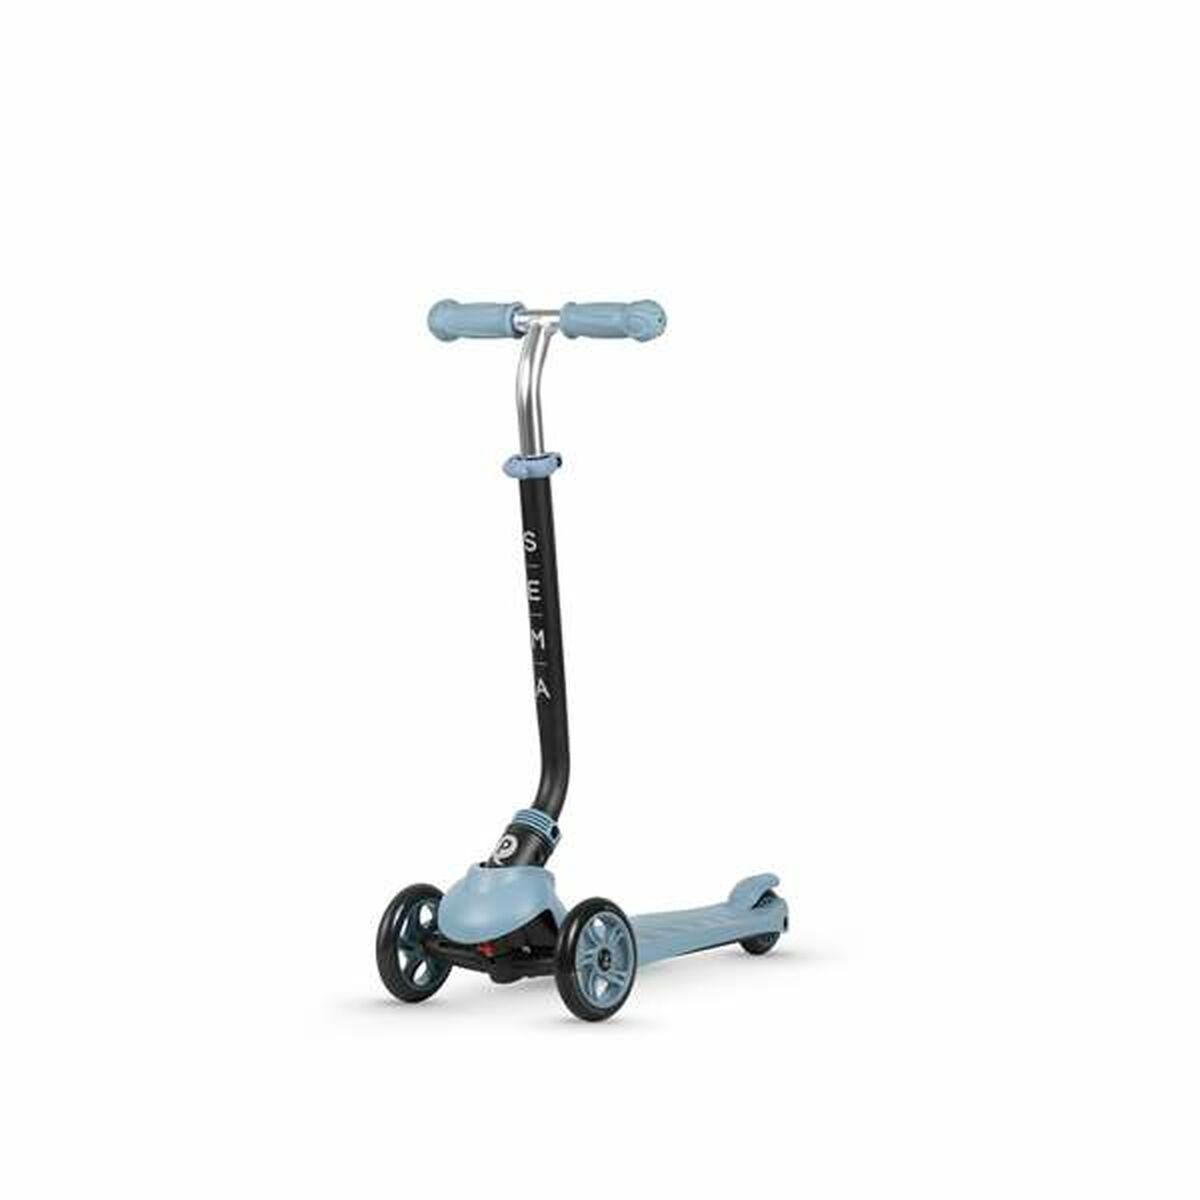 Scooter Qplay Sema Blue 5-in-1